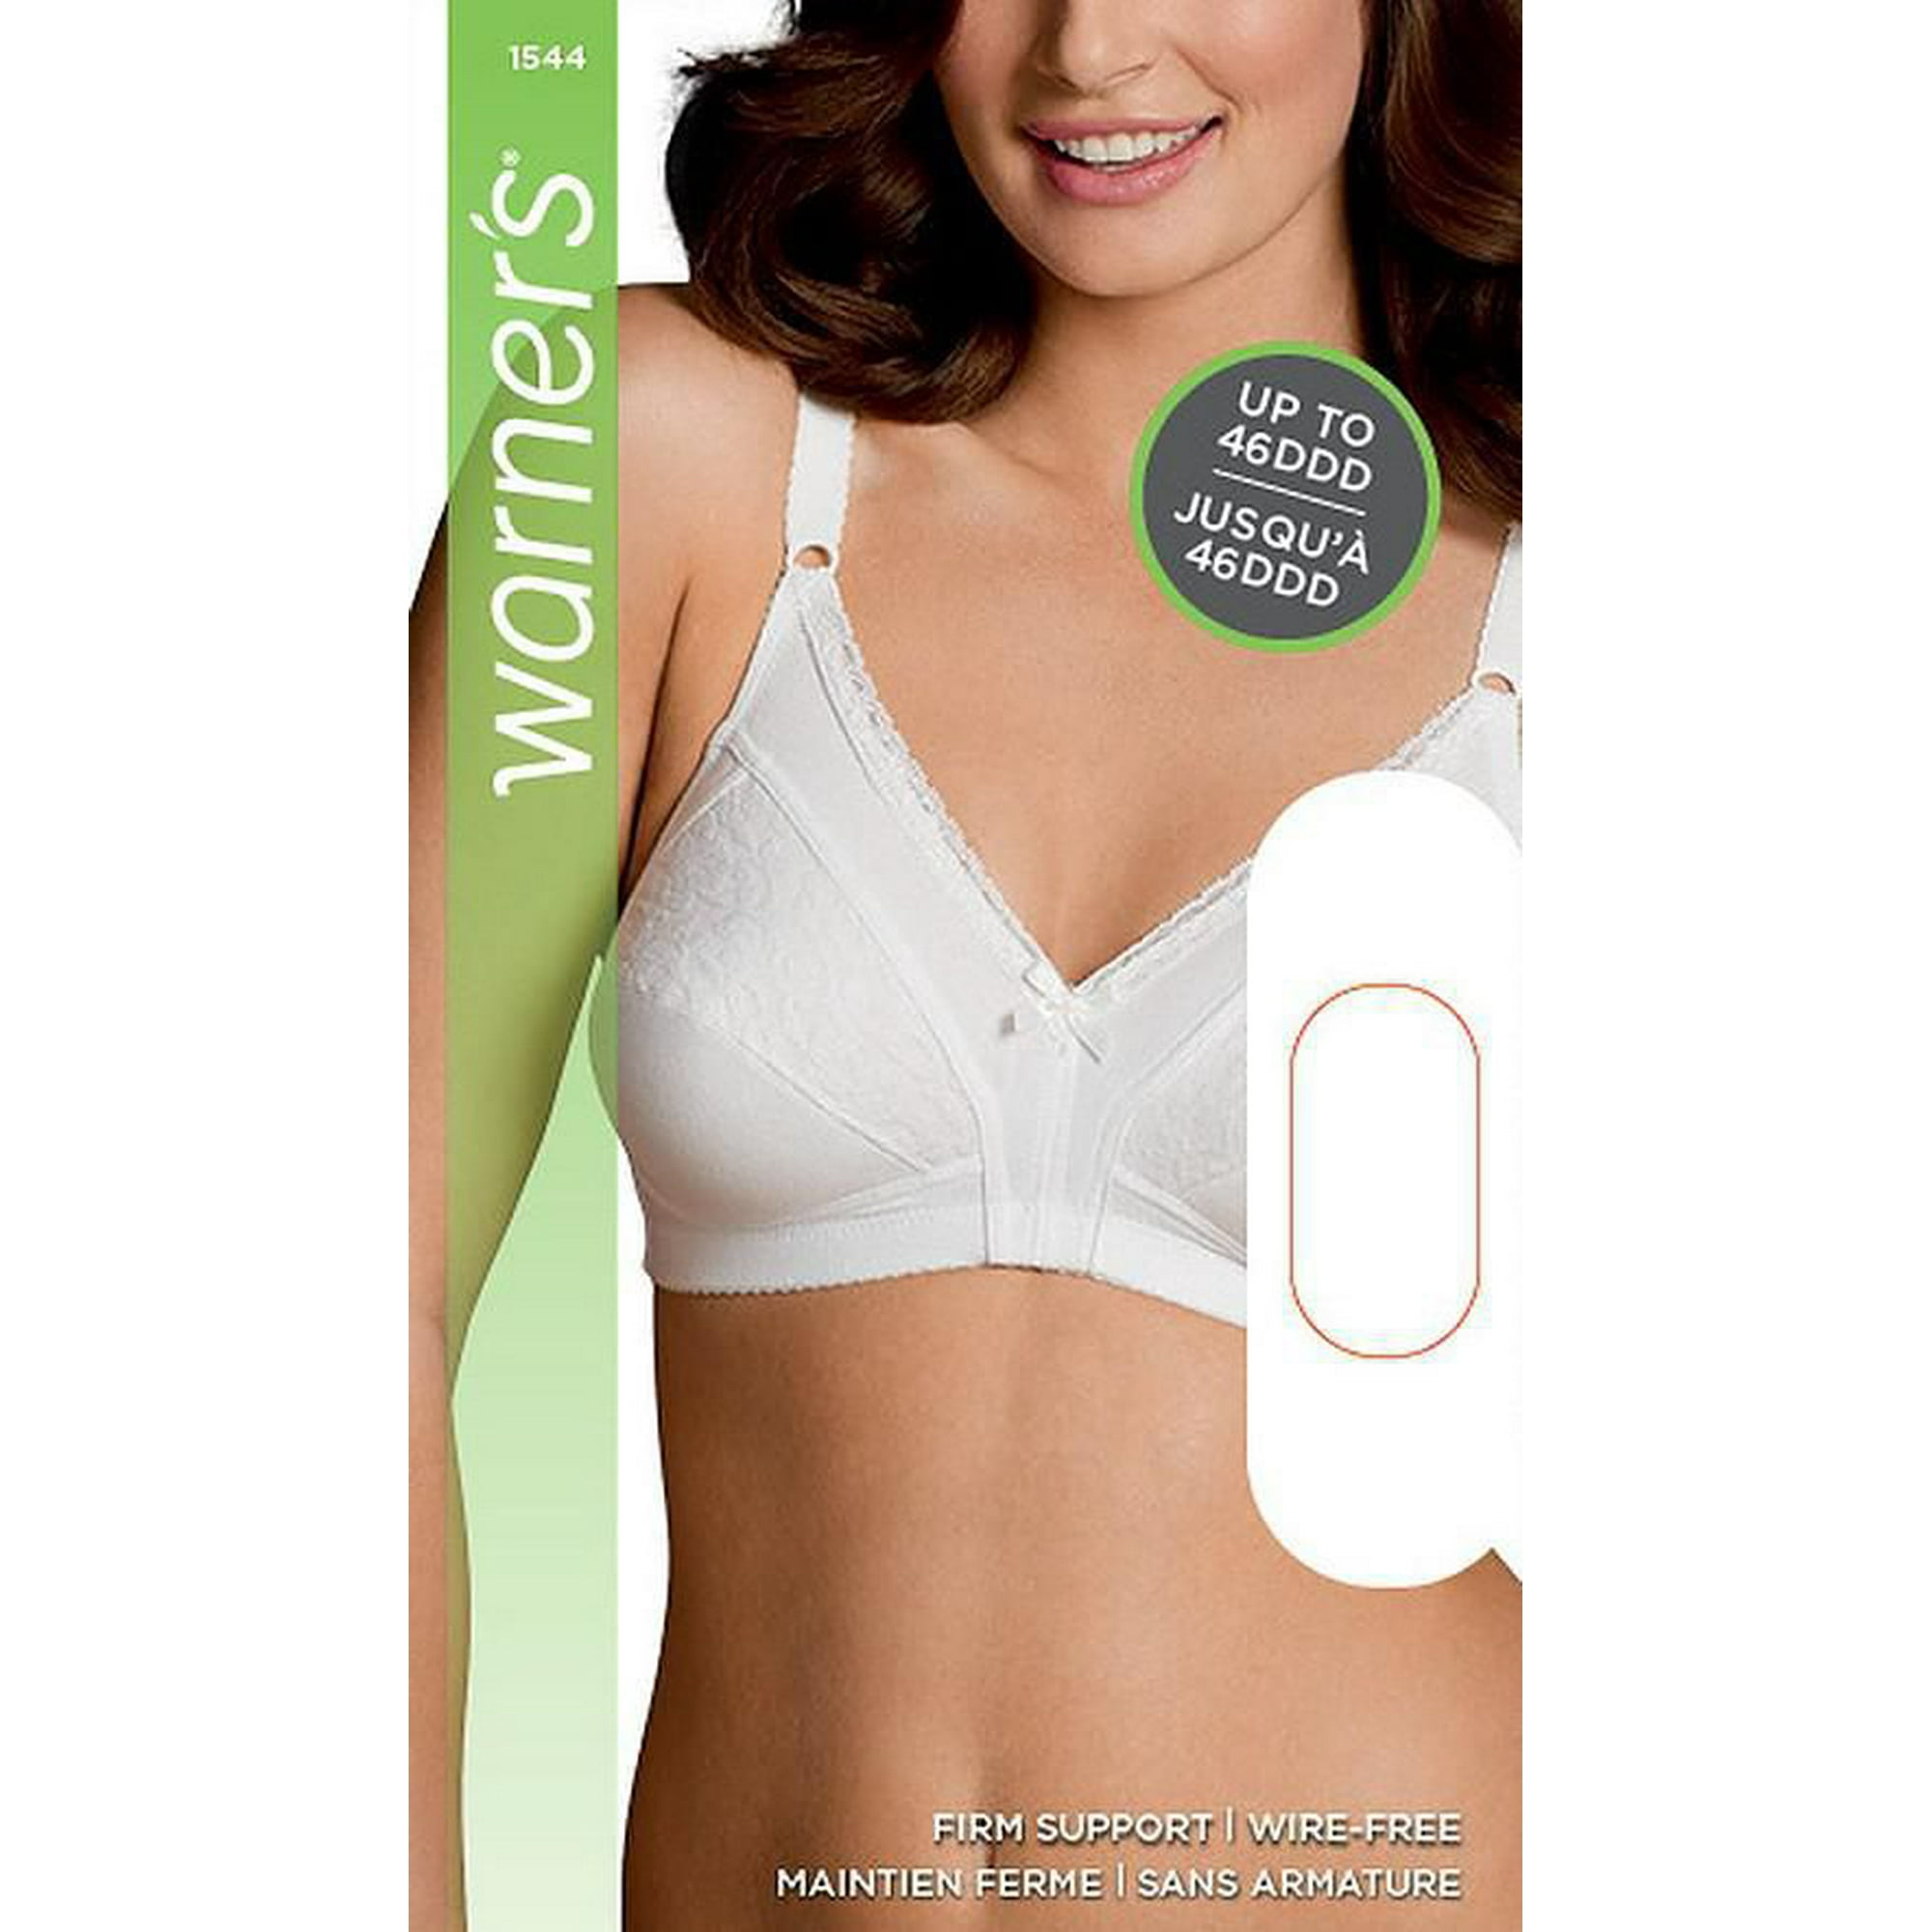 Plus Size Firm Support Wirefree Bra - White